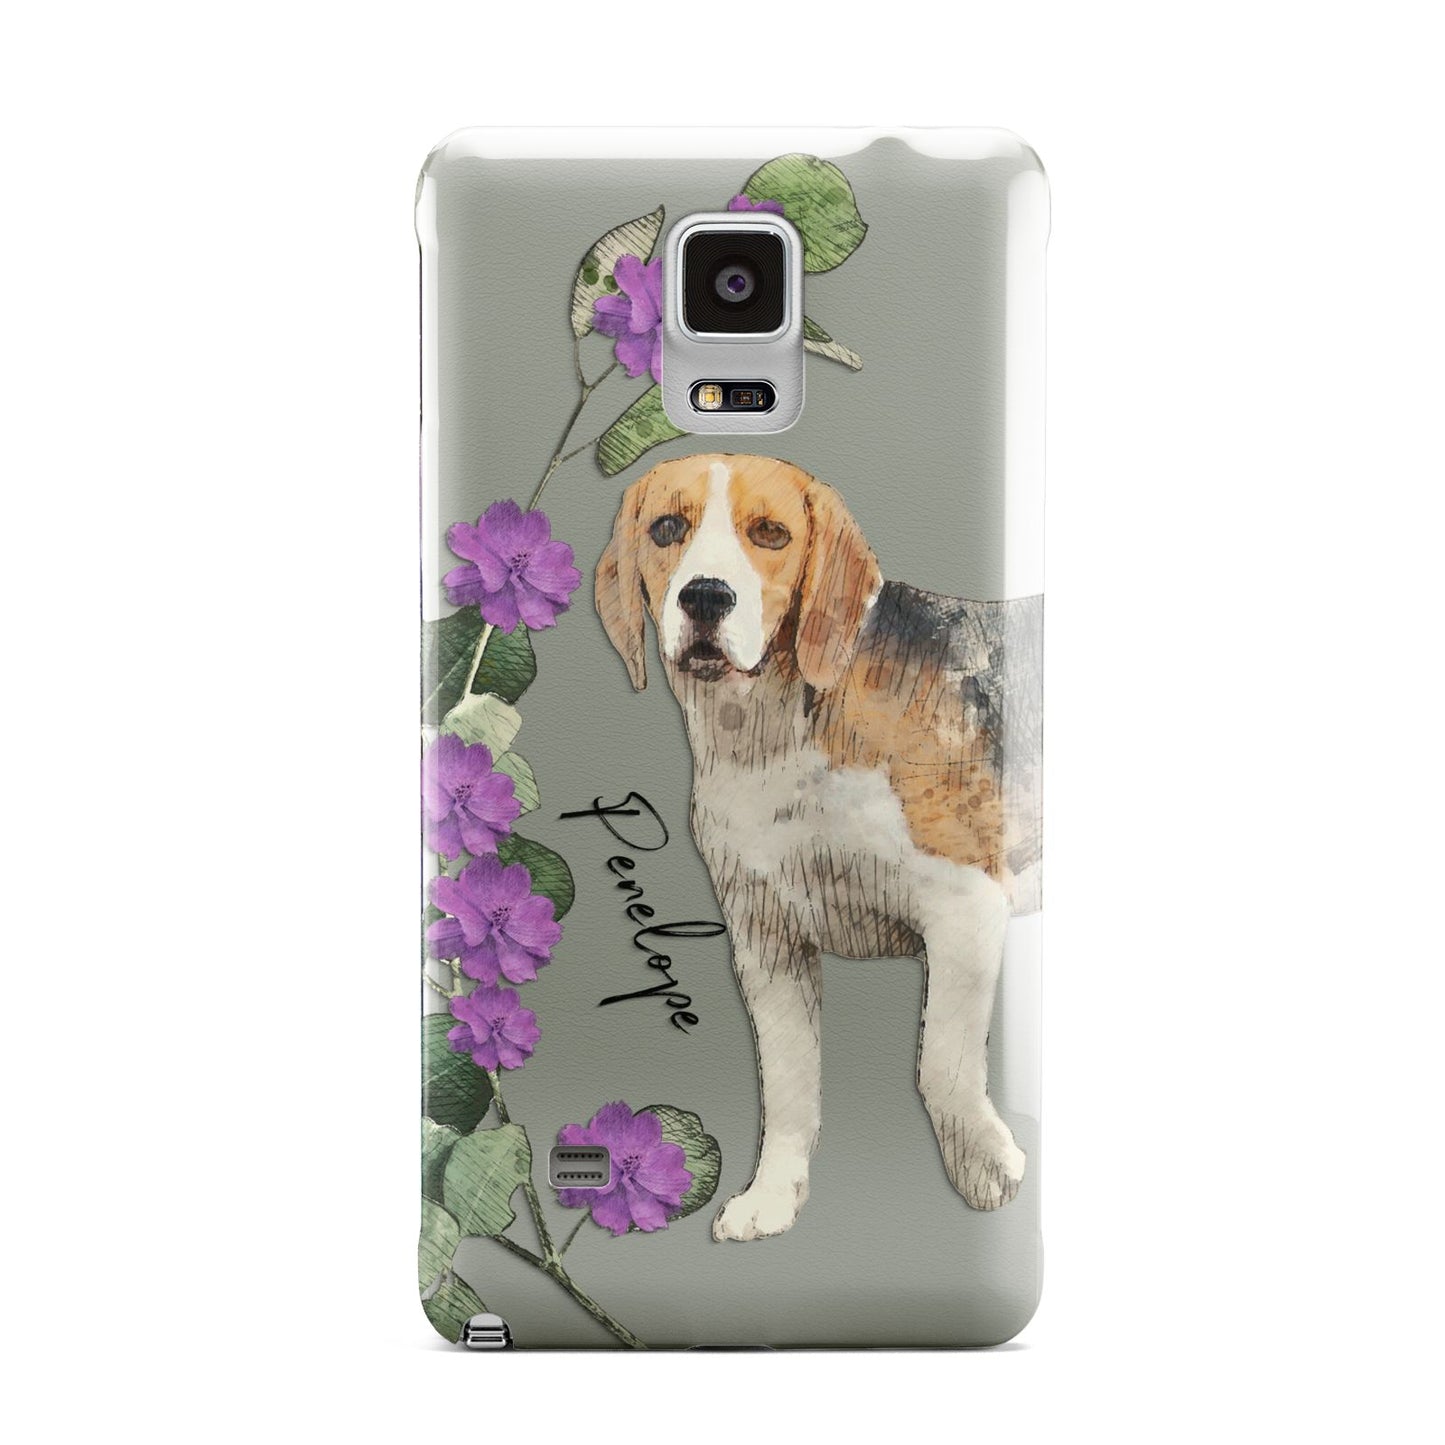 Personalised Dog Samsung Galaxy Note 4 Case